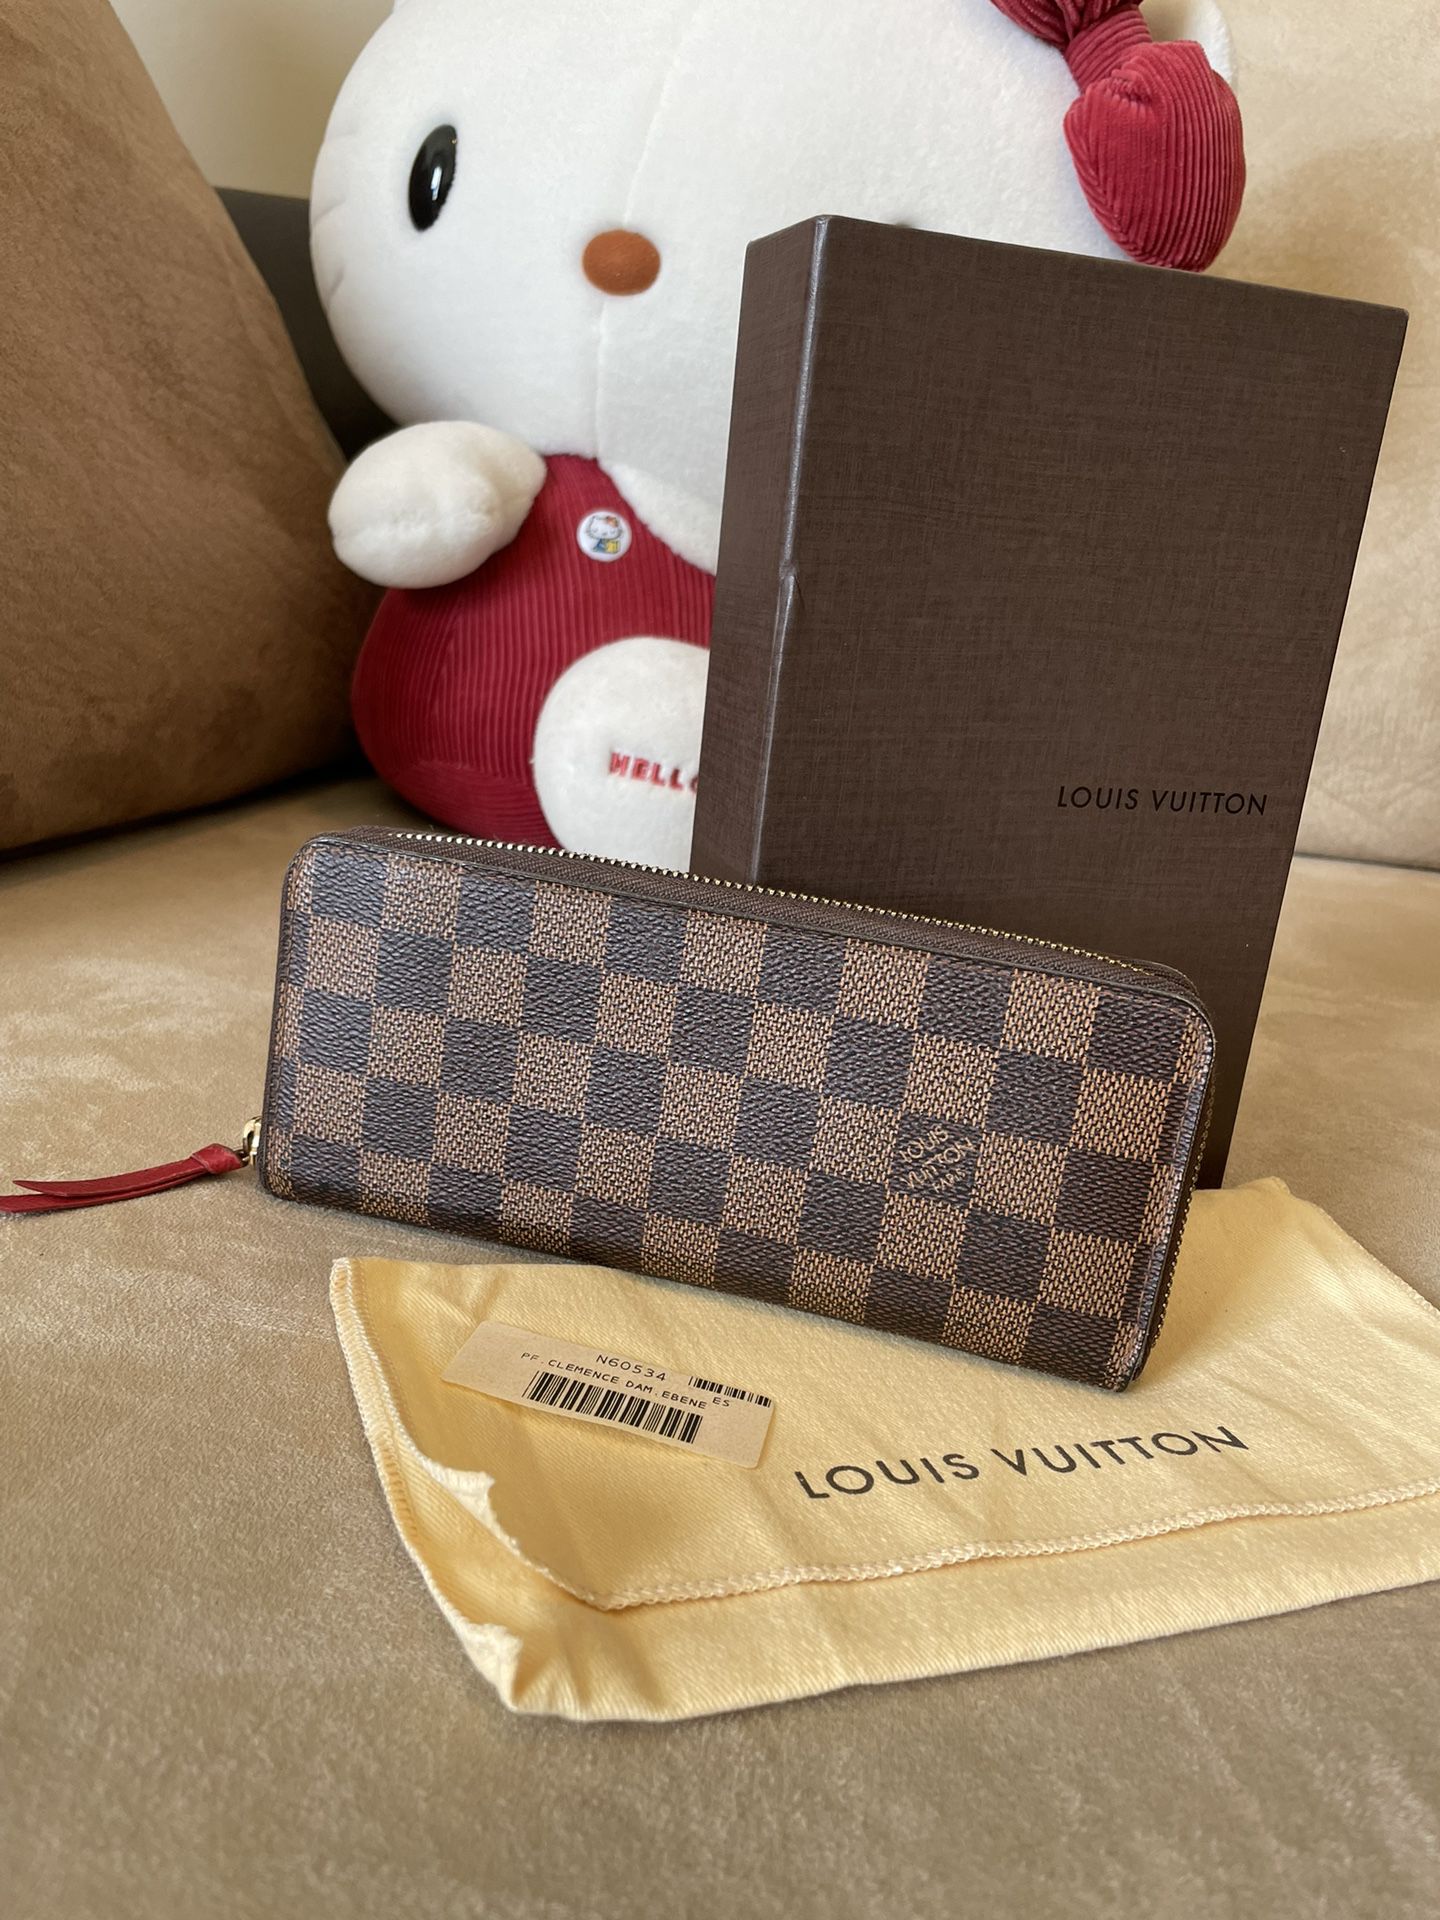 Authentic Louis Vuitton Clemence Wallet for Sale in Hiram, GA - OfferUp